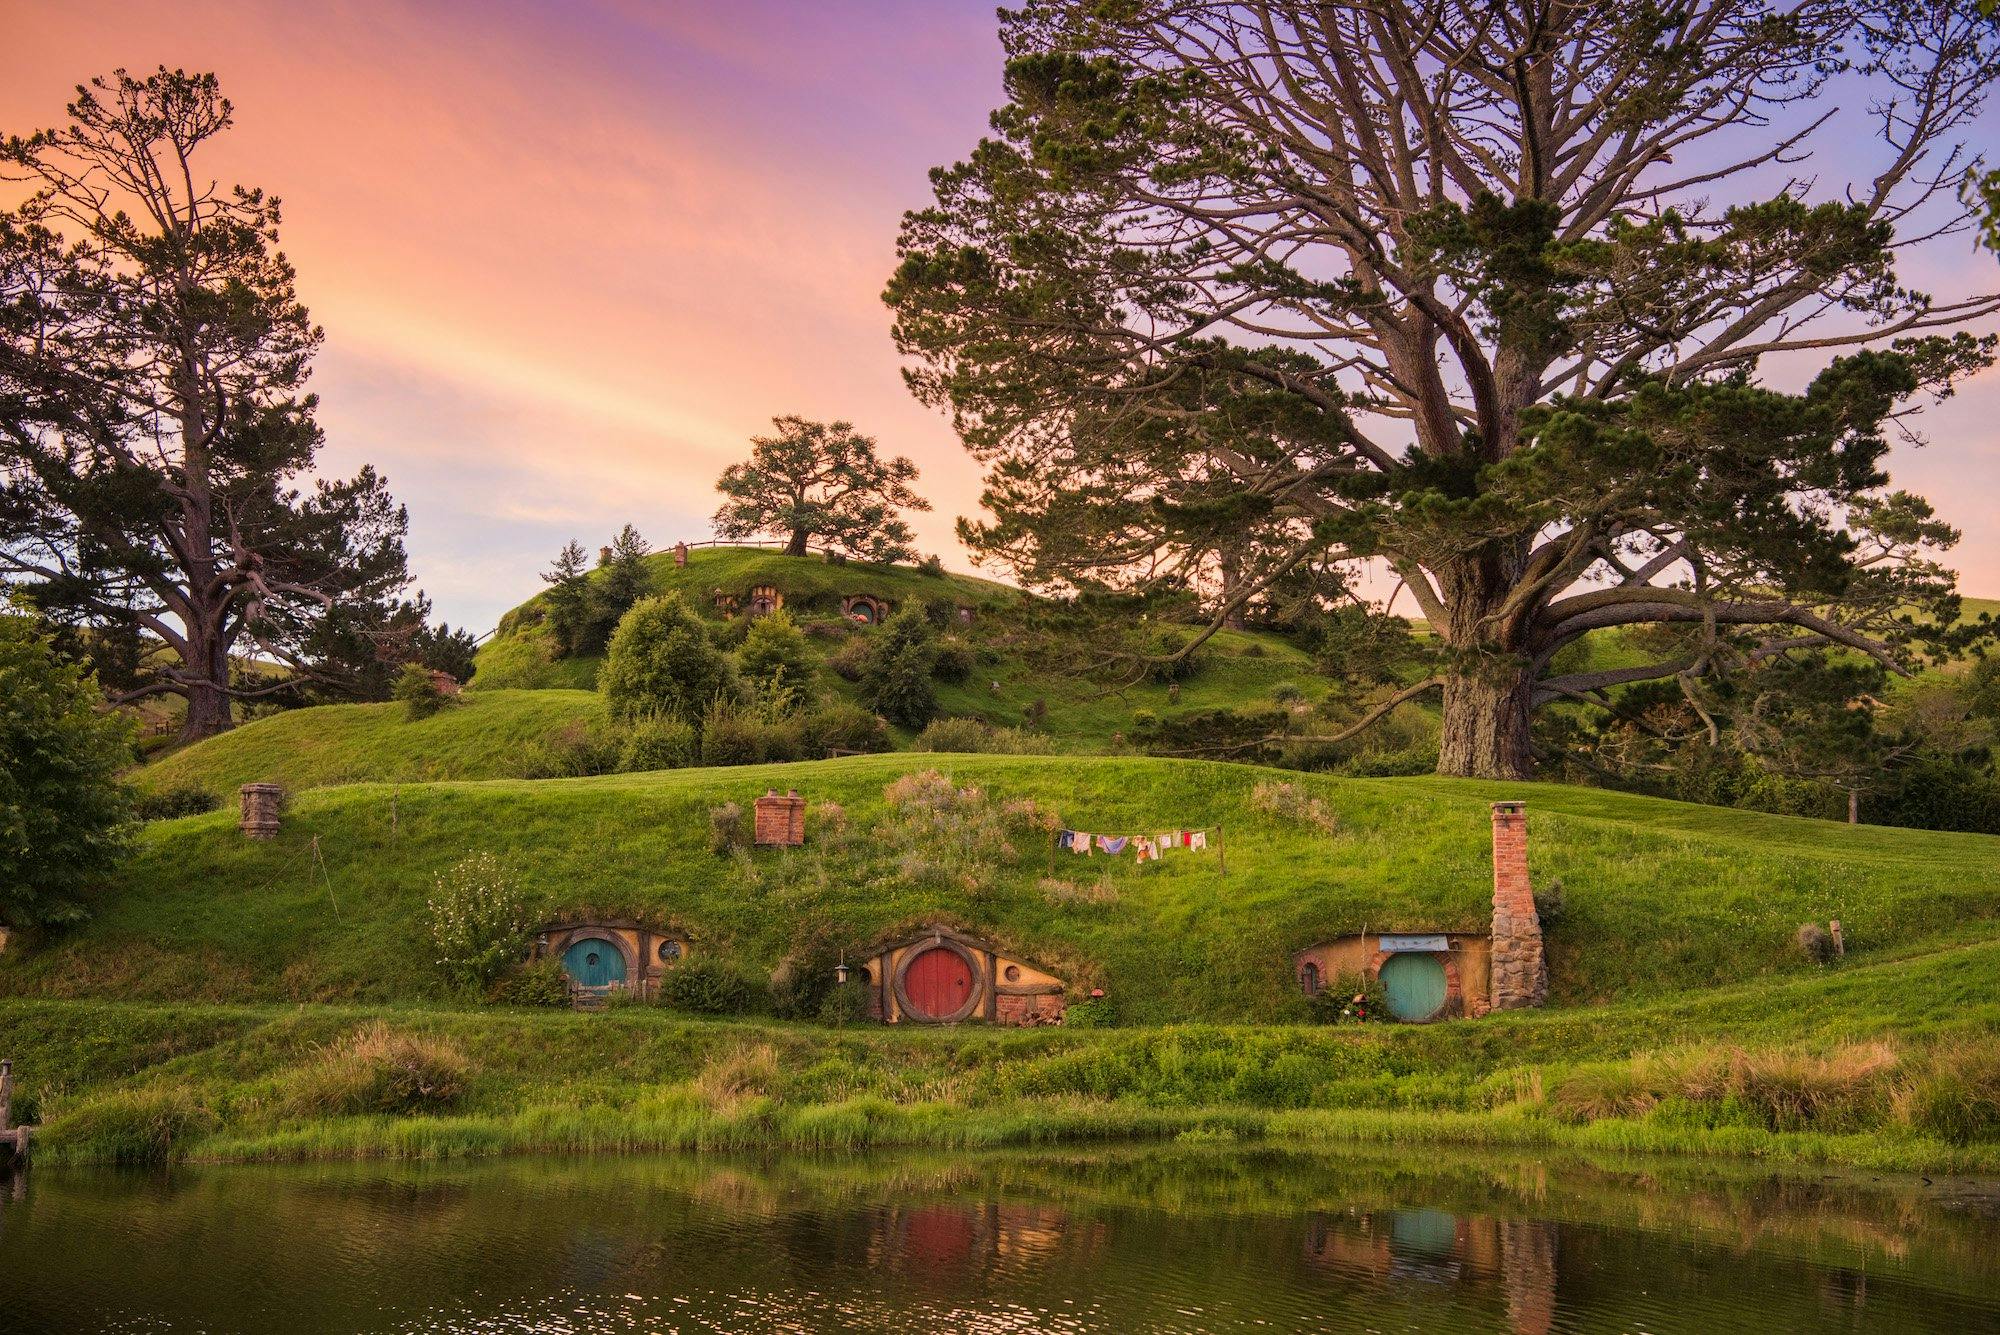 Middle earth experience Hobbiton movie set and Te Puia geothermal valley Musement